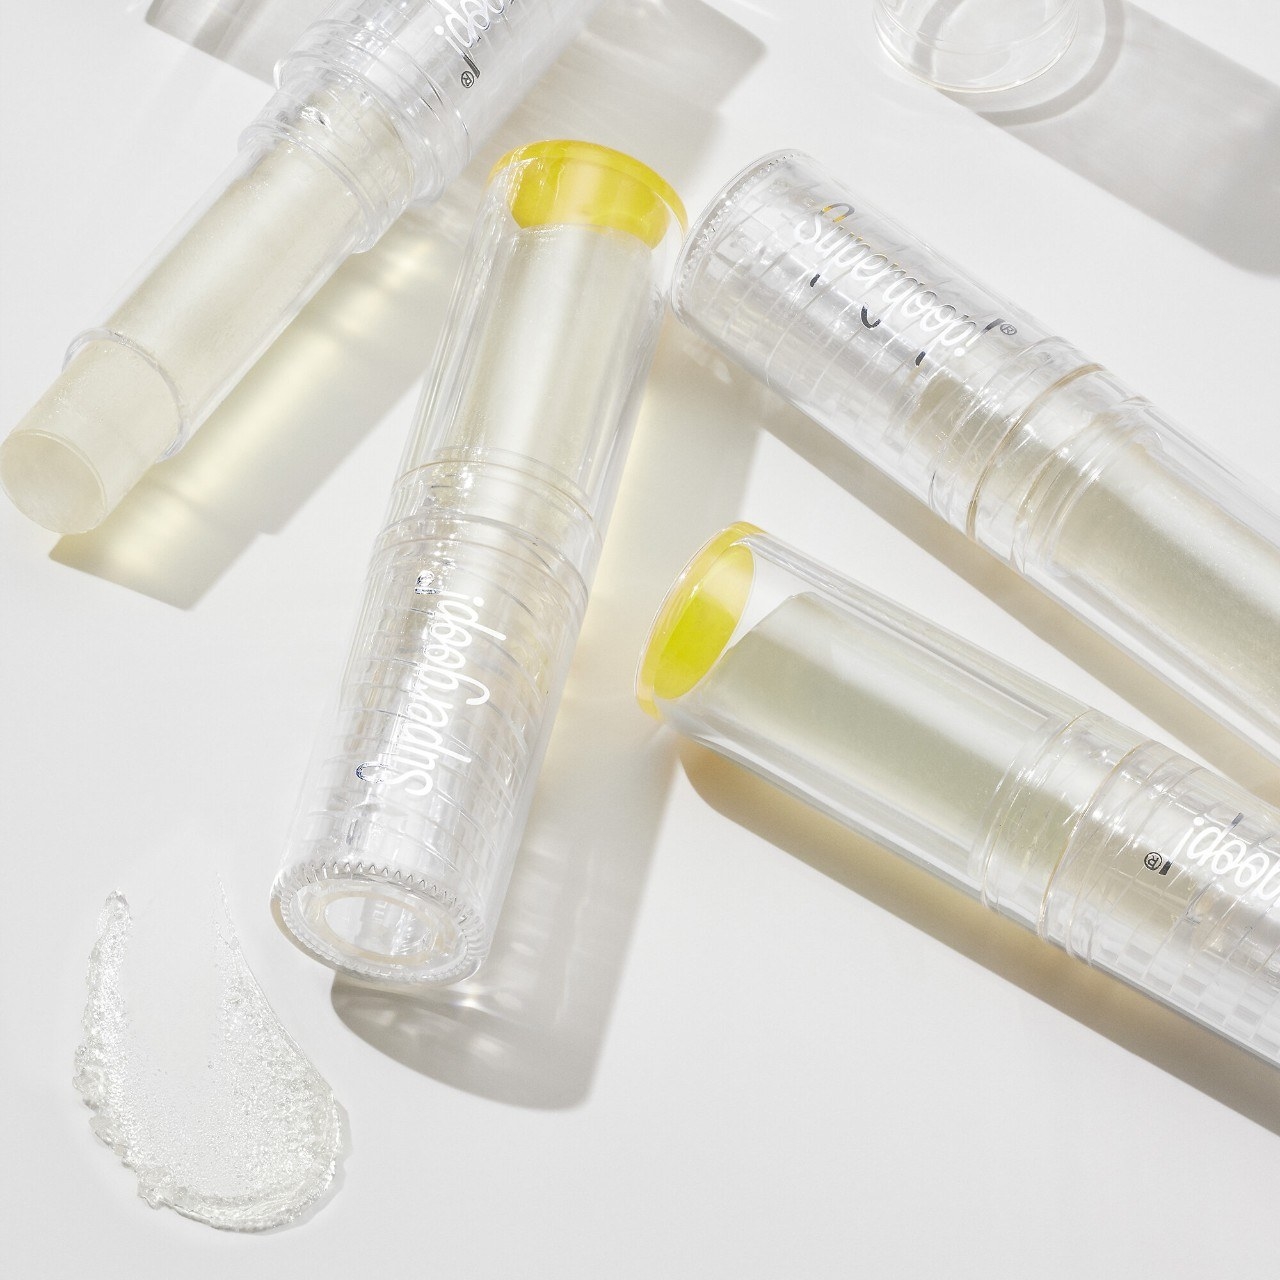 clear tube of supergoop lip sunscreen